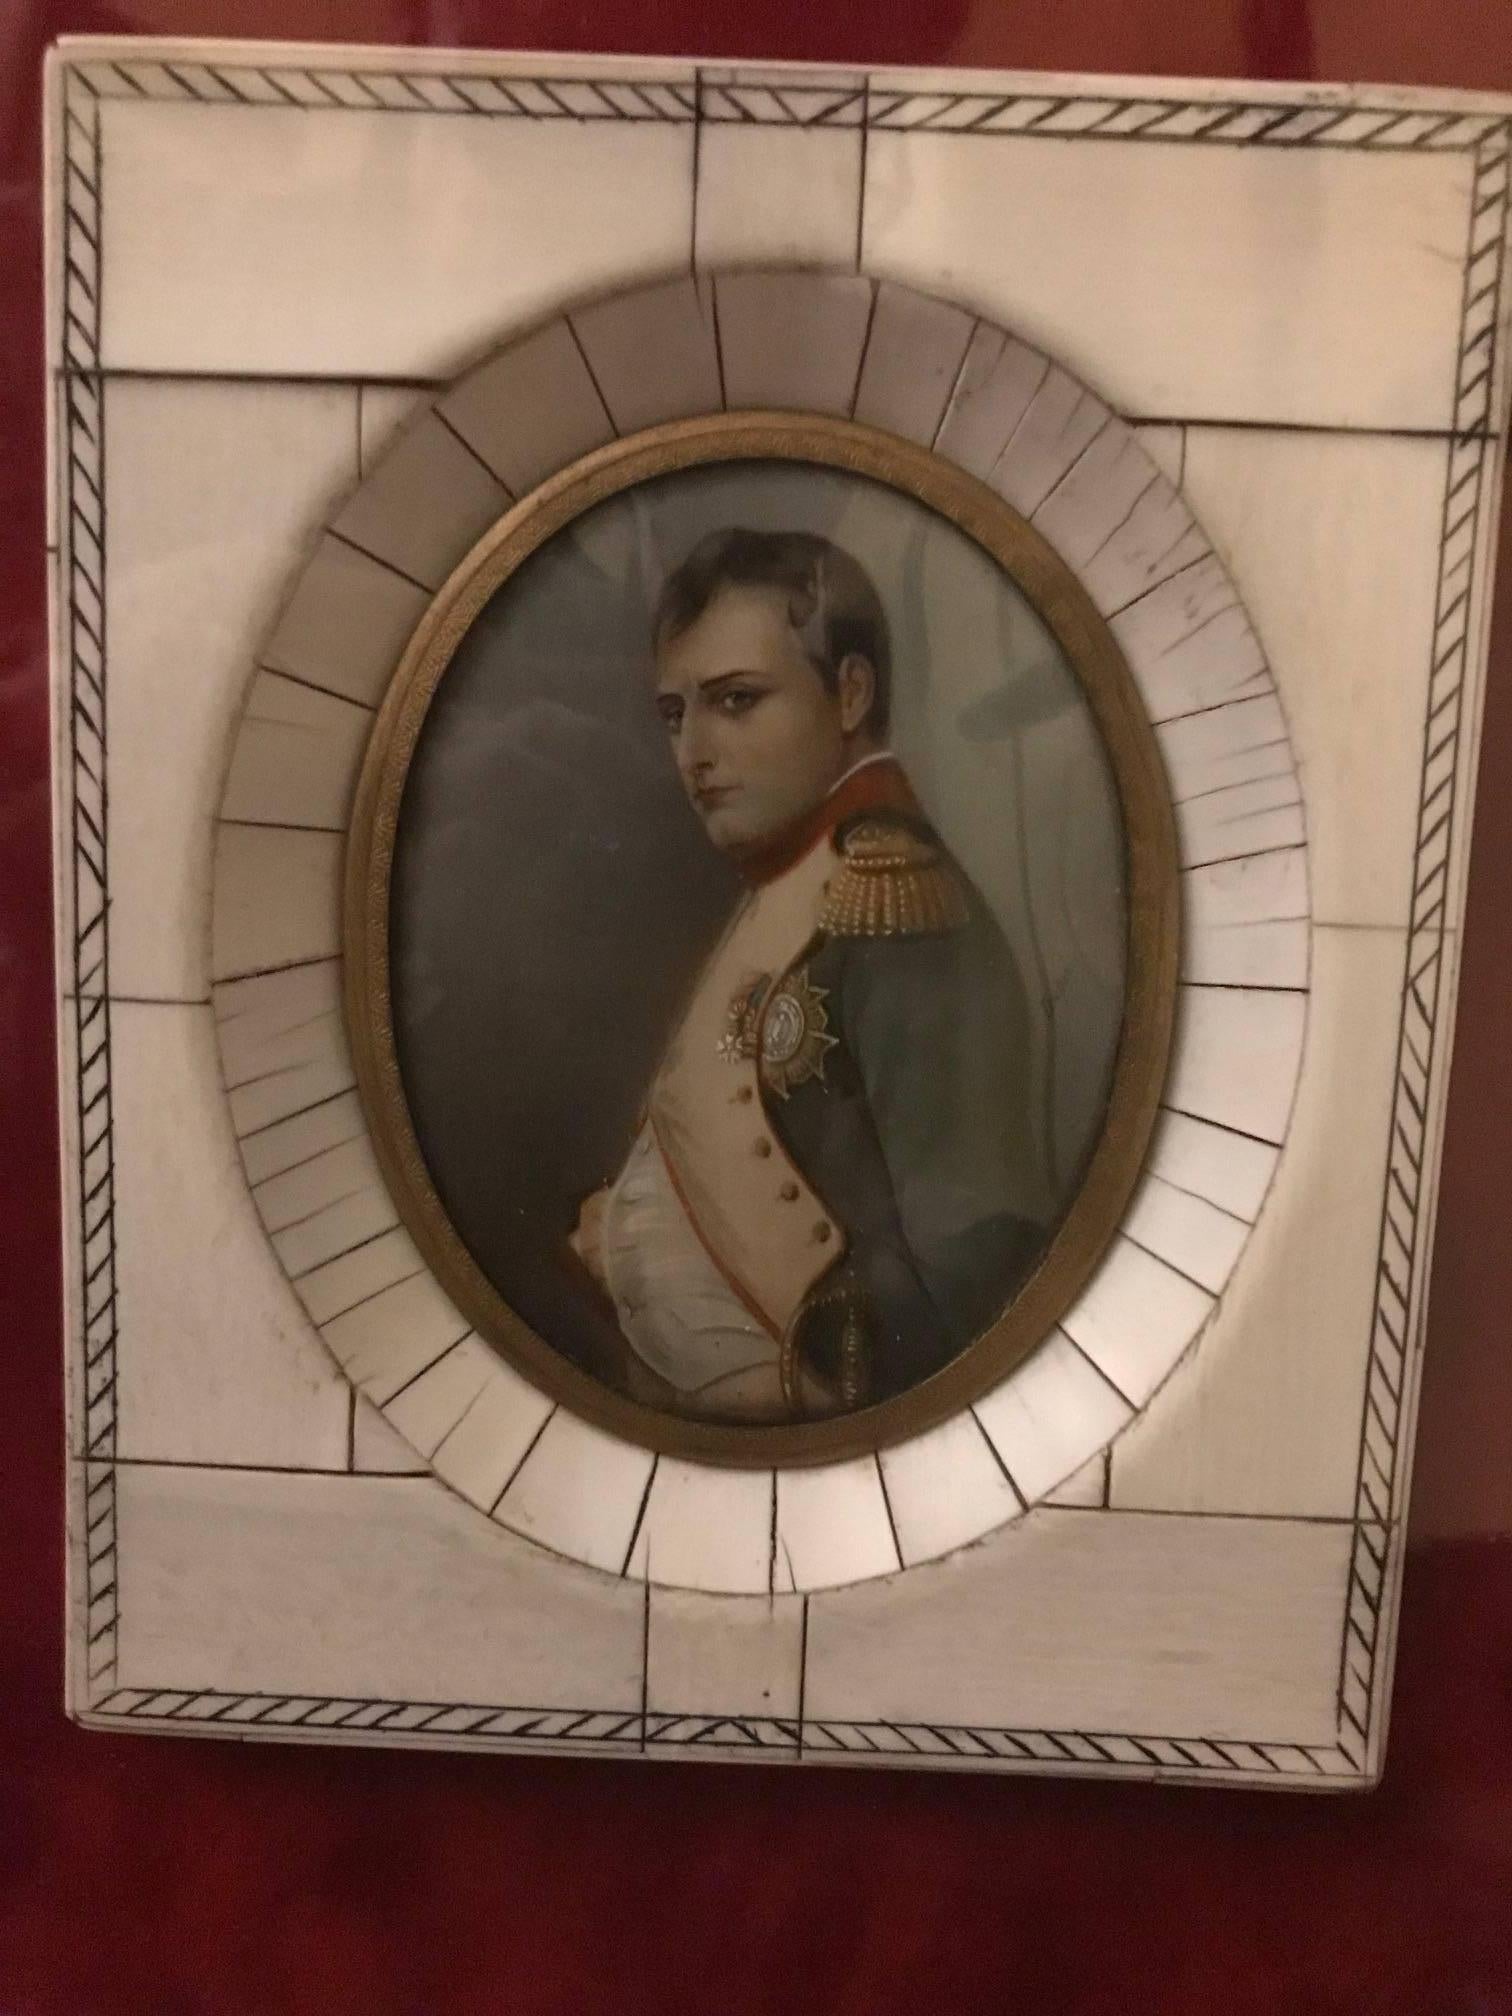 A pair of miniature portraits in original frames matted and framed in a larger museum frame. The portraits of Napoleon and Josephine of exceptional quality, signed by the artist. 
The portraits in the original 19th century frames measure 5.25